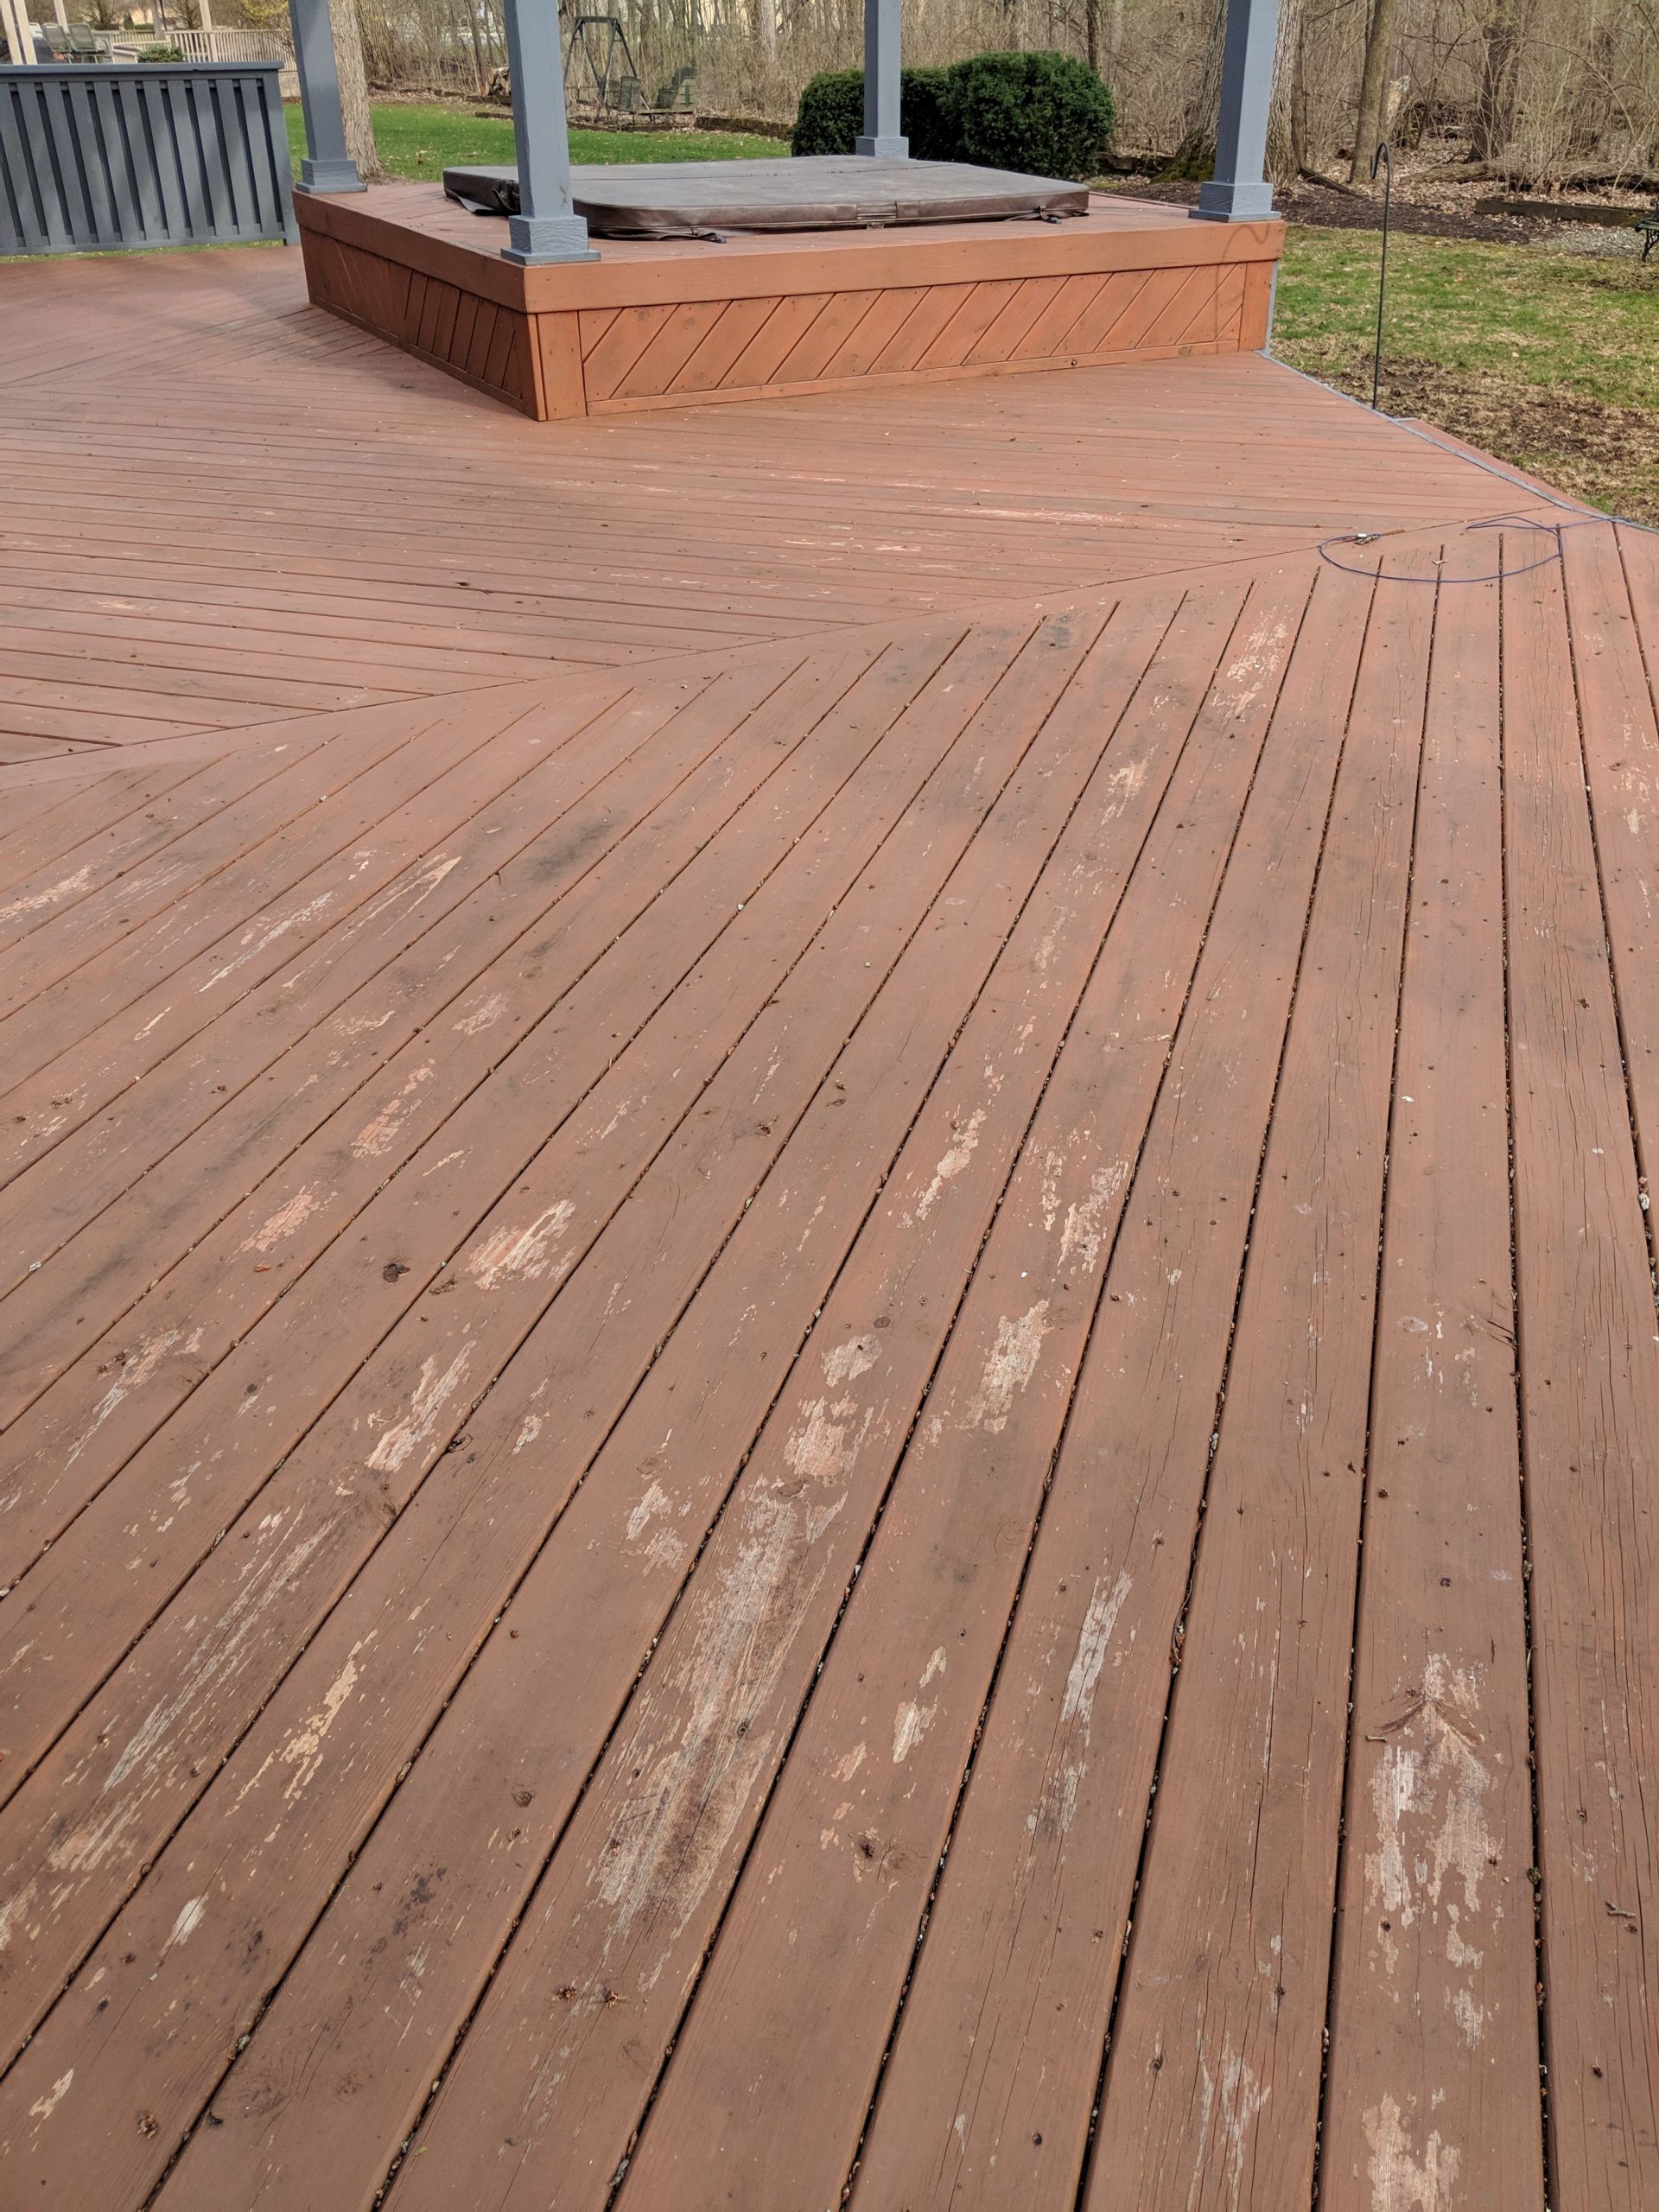 Stripping Deck Paint
 Deck Stripping – Removing an Old Deck Stain